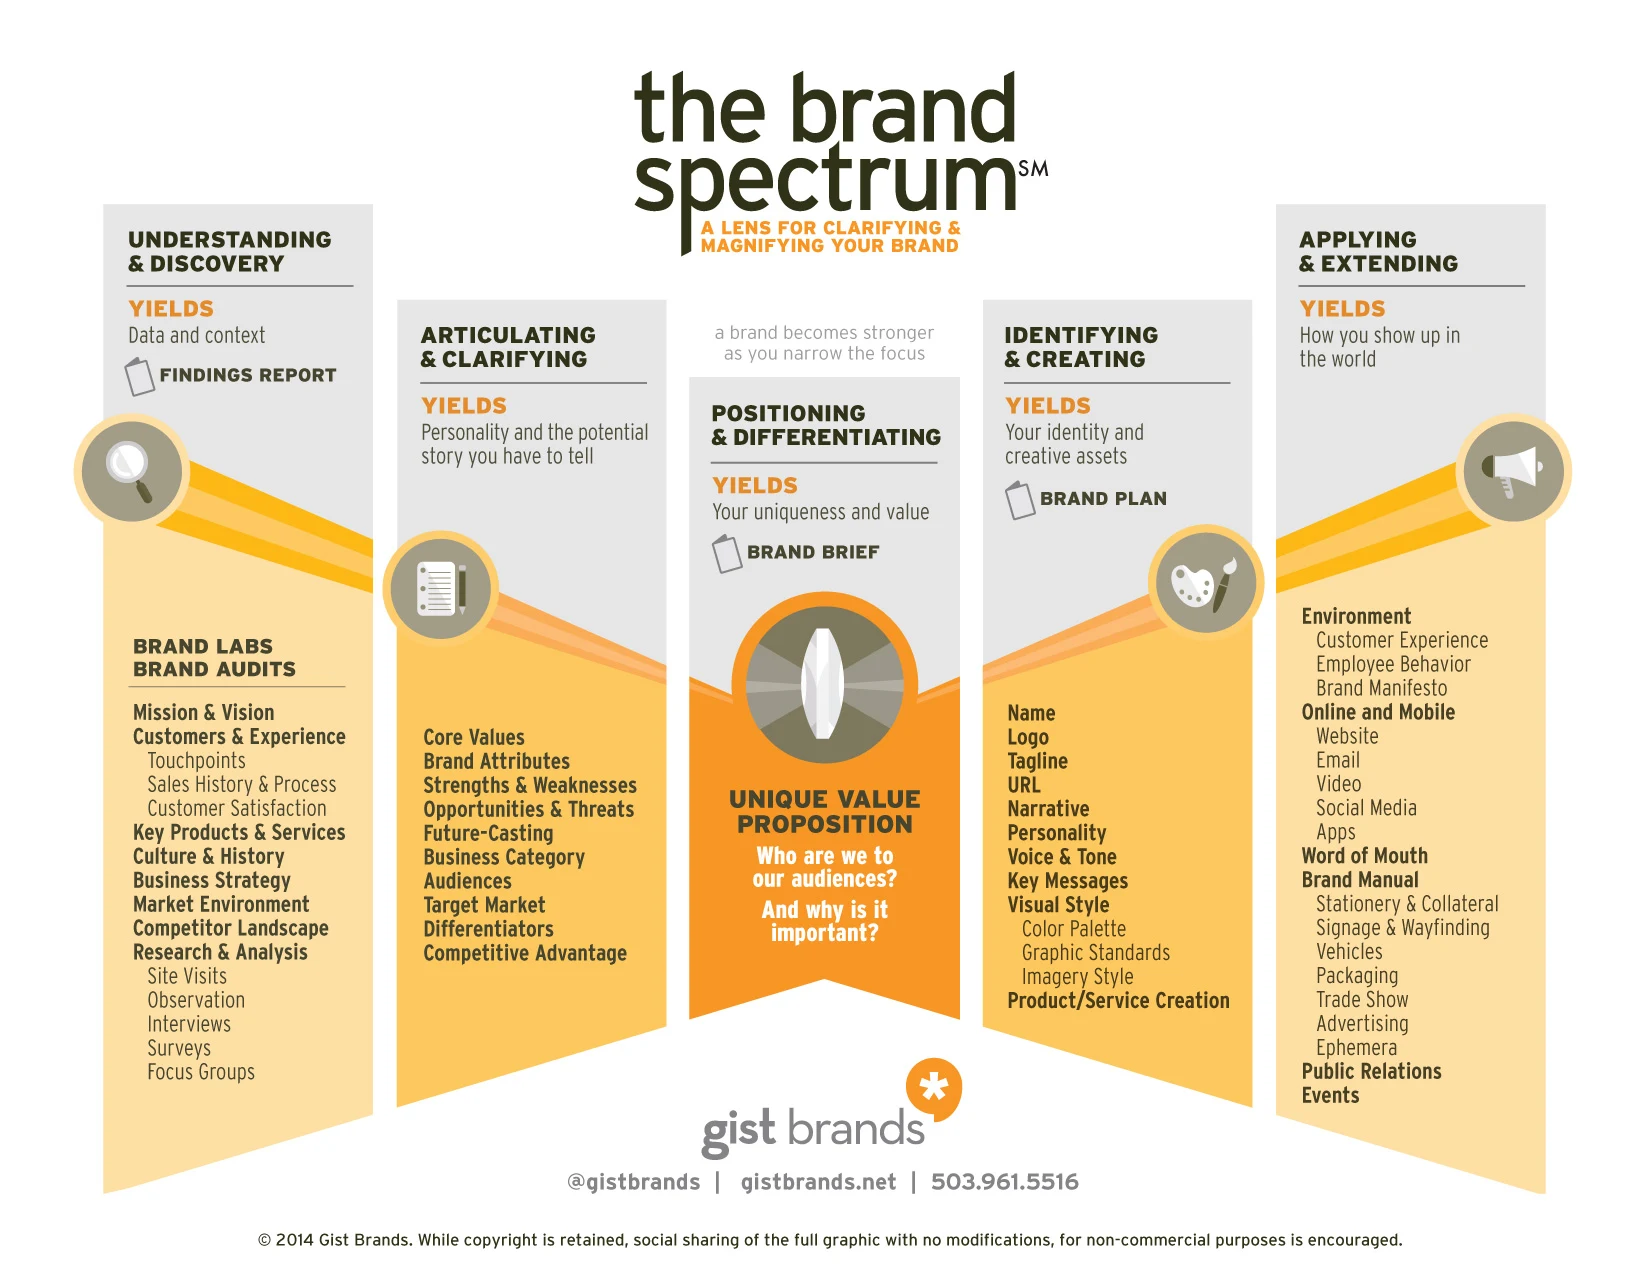 The Brand Spectrum - A Basic Guide to Branding: The Brand Evolution Process